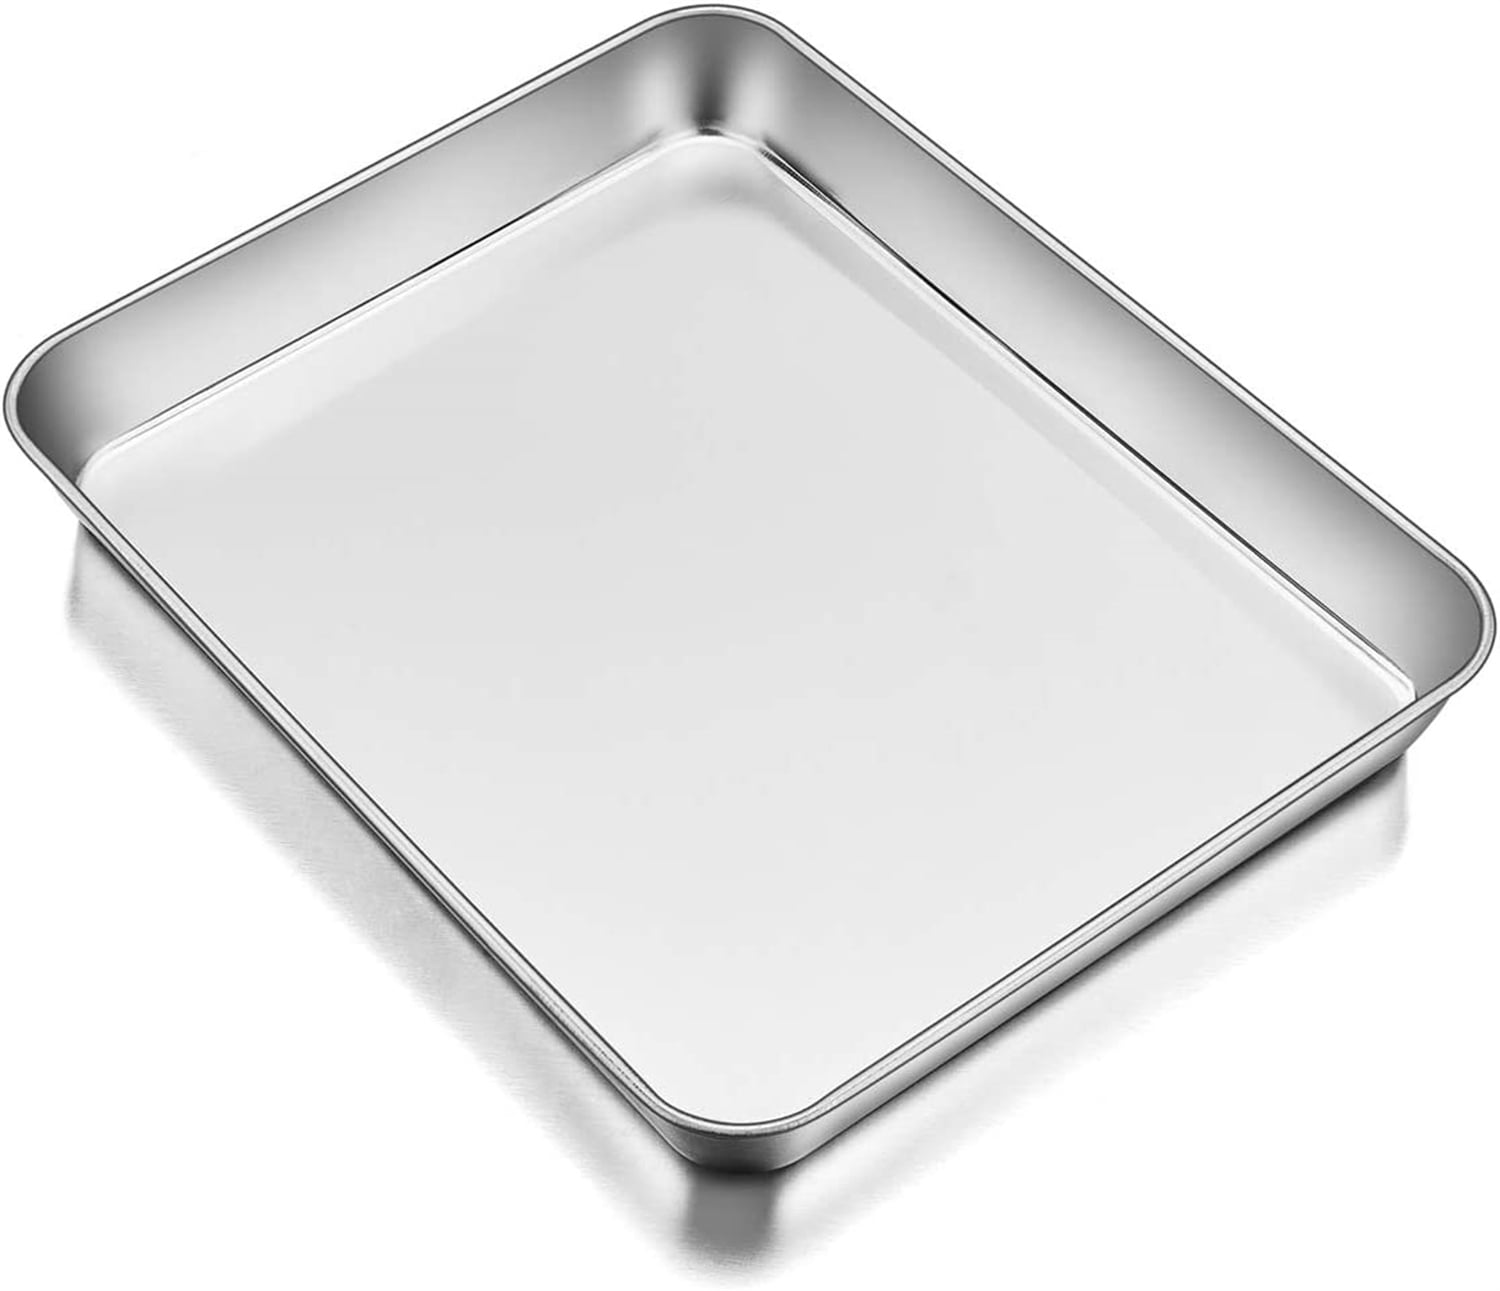  P&P CHEF 9.3 Inch Mini Toaster Oven Tray Set of 2, Stainless  Steel Small Baking Toaster Oven Pans Deep Lasagna Pans, Corrugated Bottom &  1.85-Inch Rim, Mirror Finished & Easy Clean